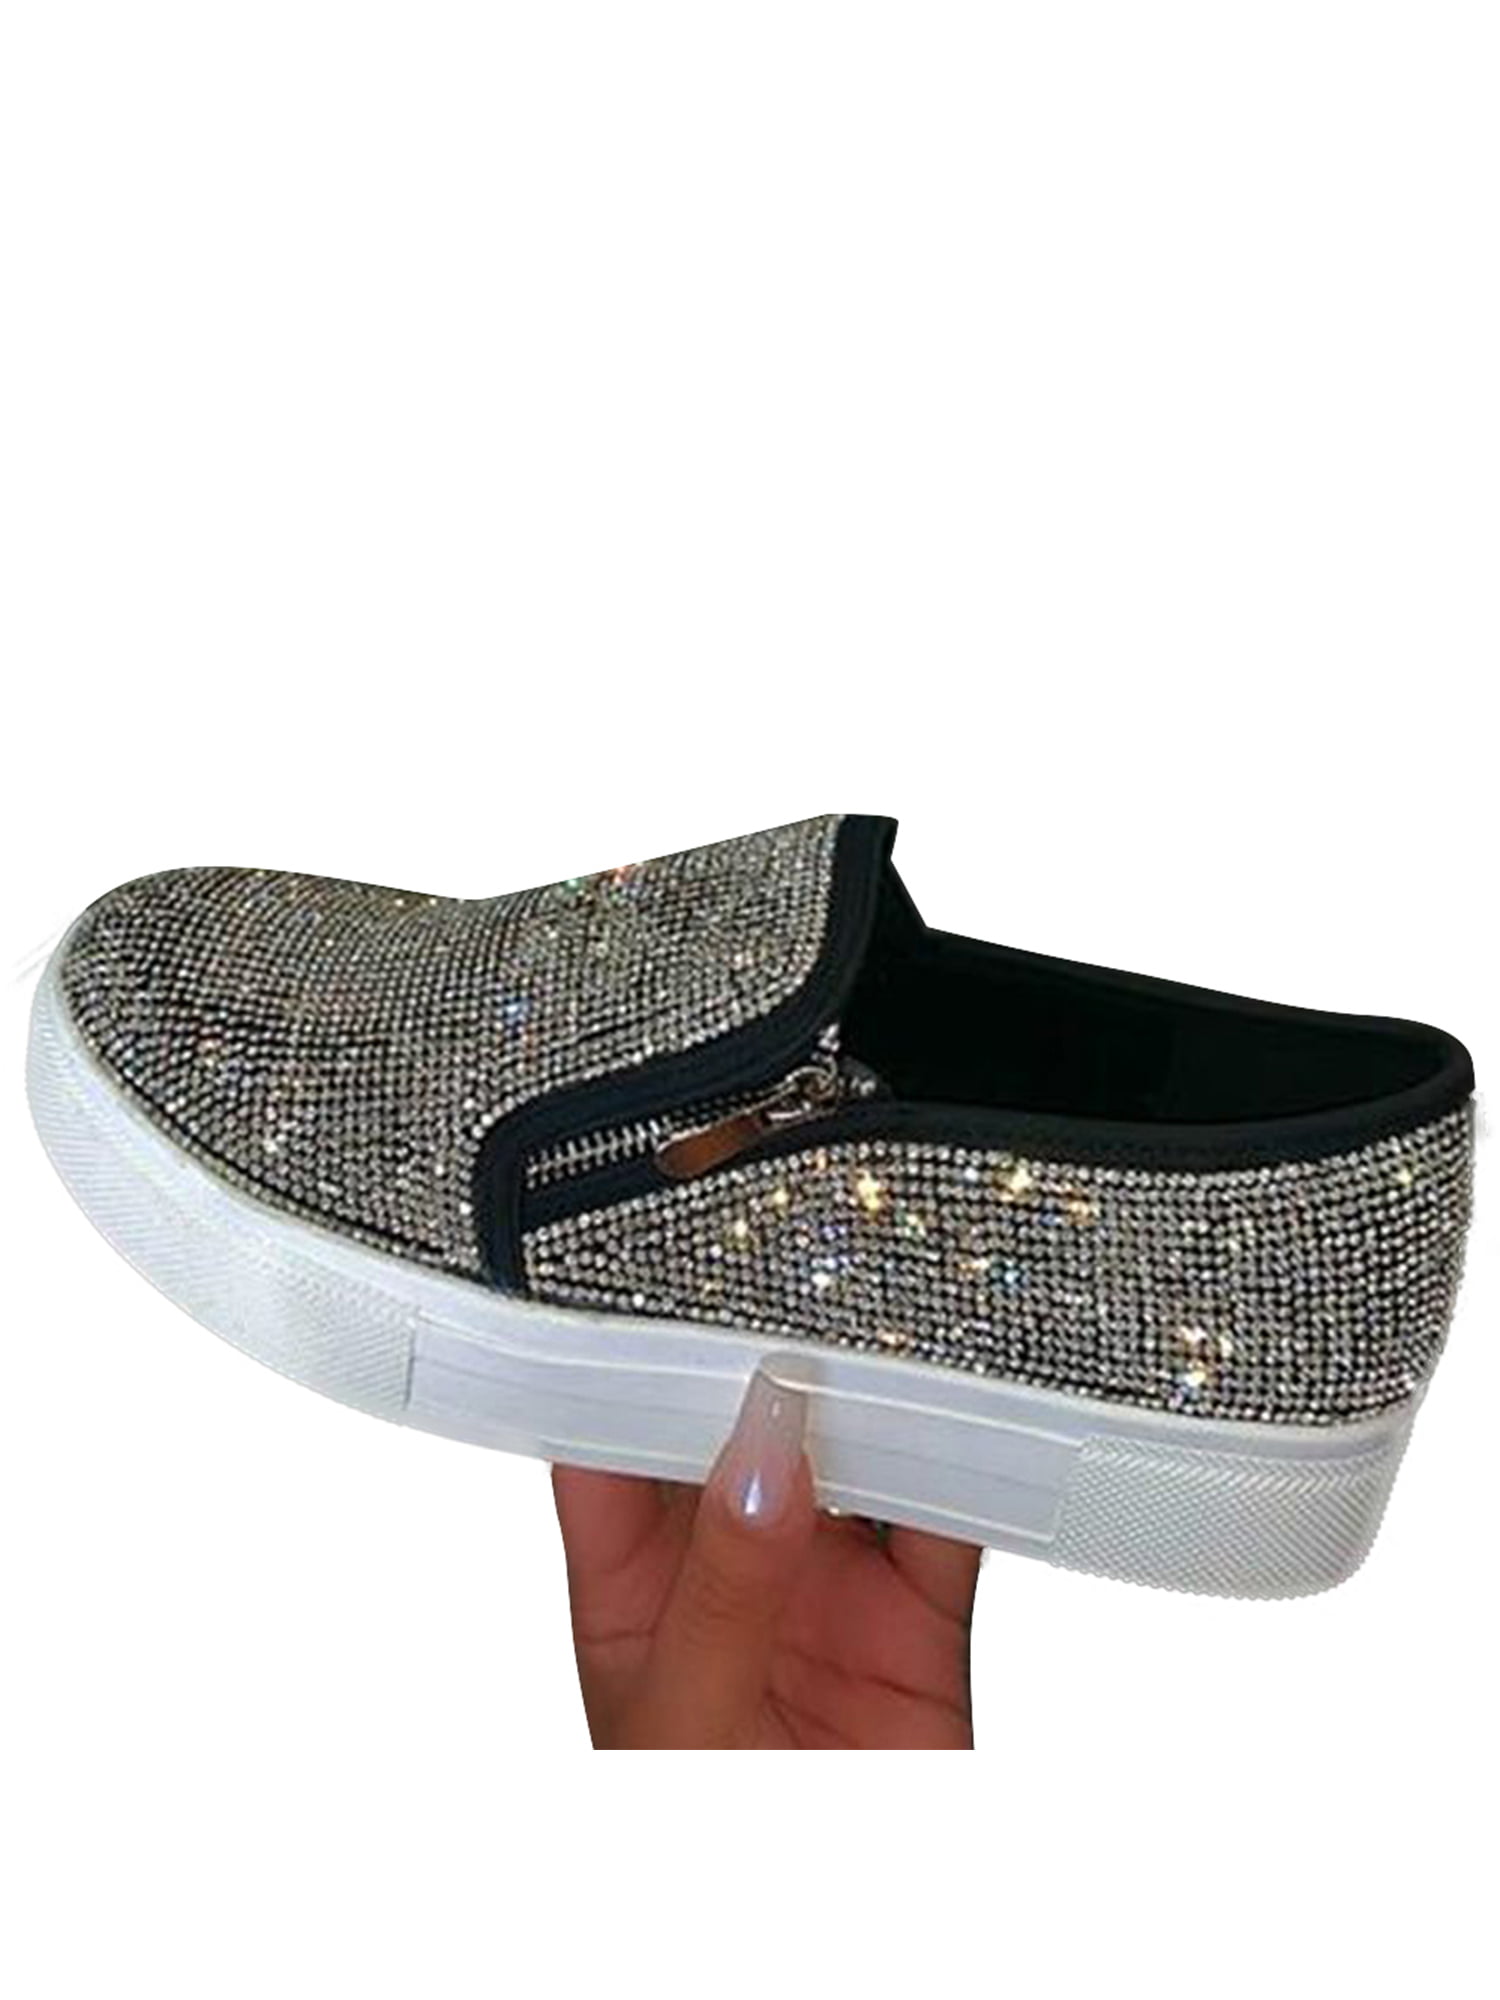 Mens Slip On Shoes Sparkle Shoe Round Toe Casual Mens Loafer UK SIZE 7.5-12